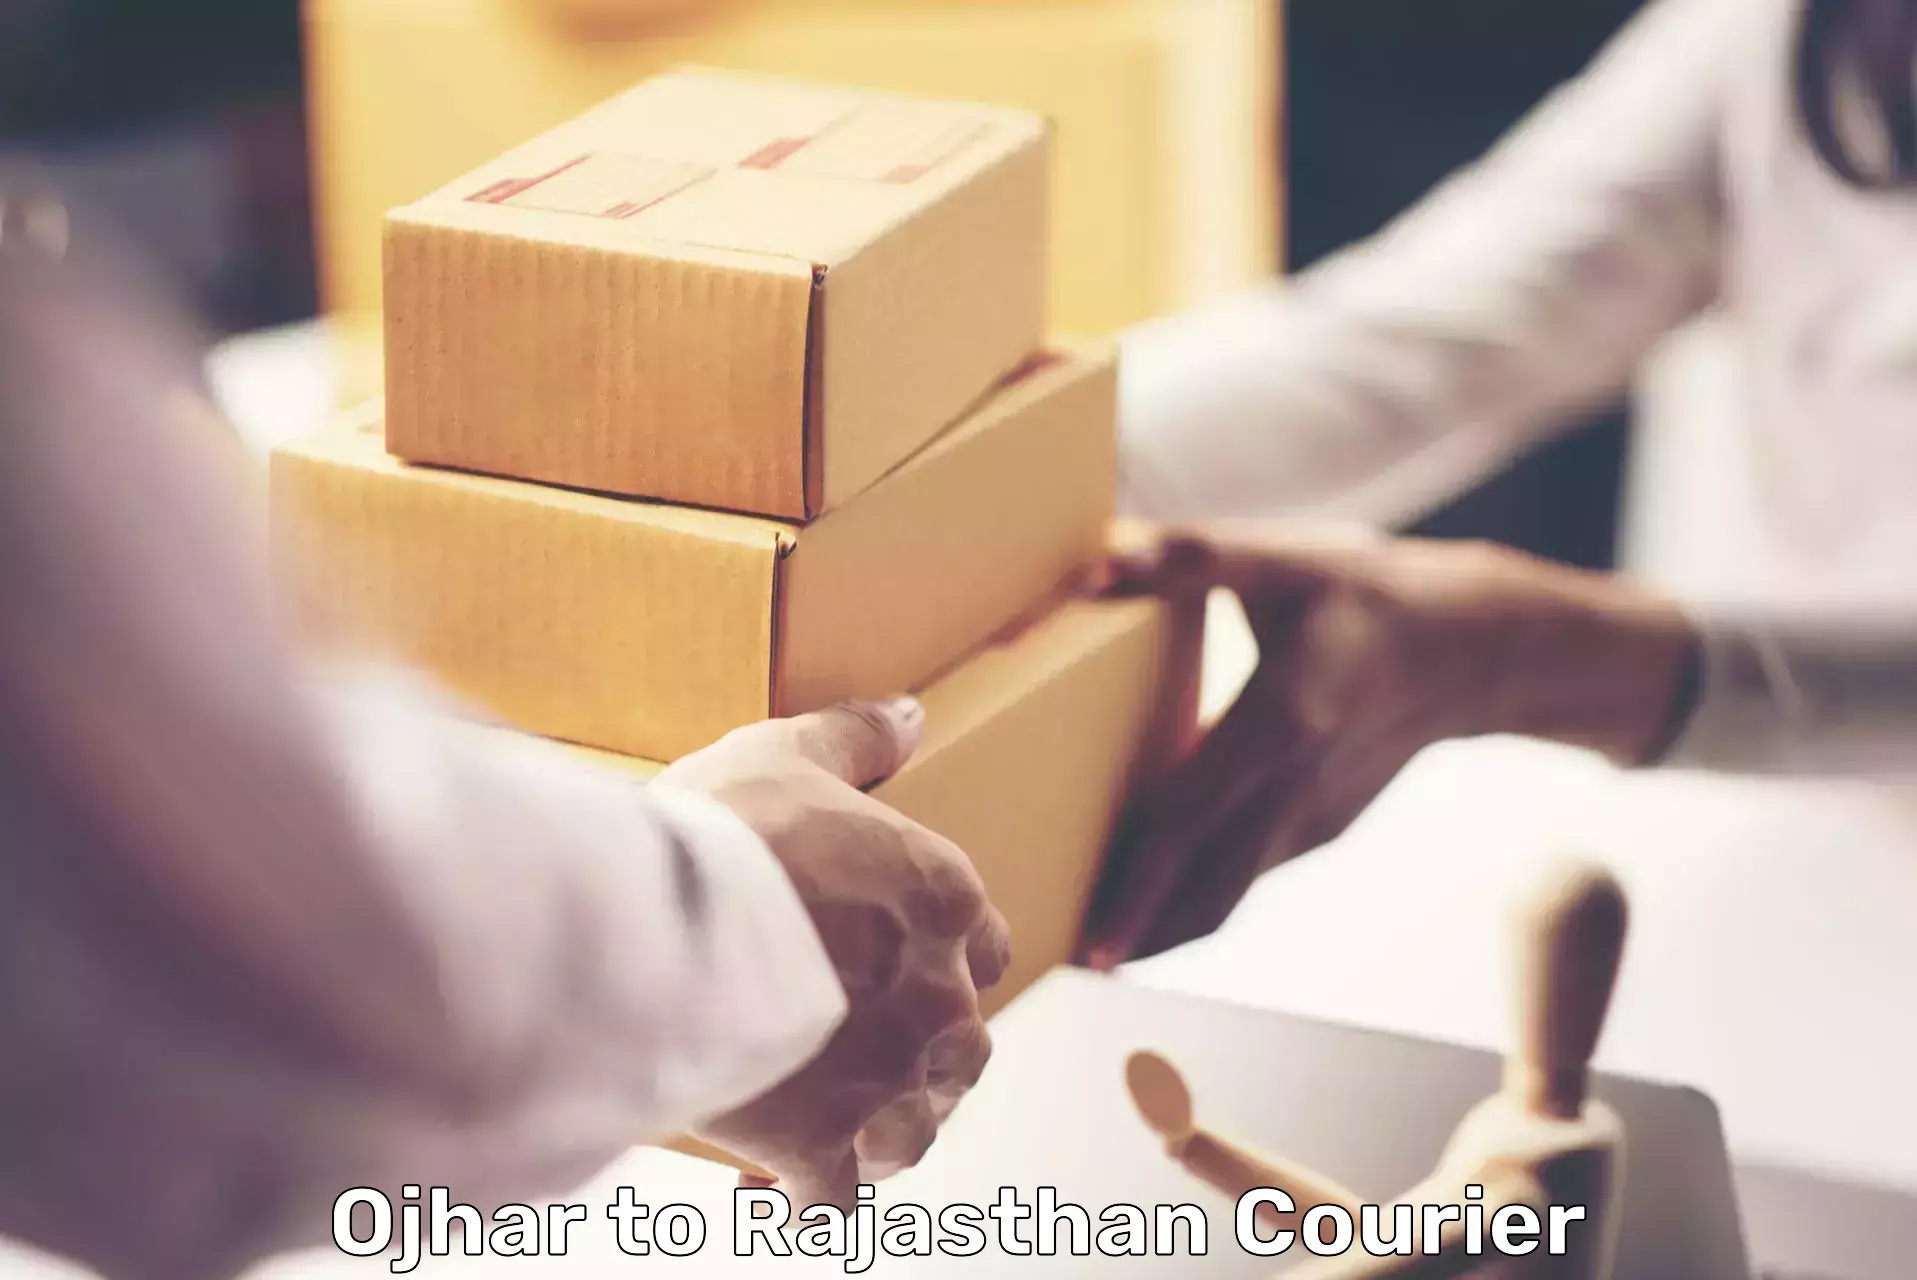 Global courier networks Ojhar to Pilani